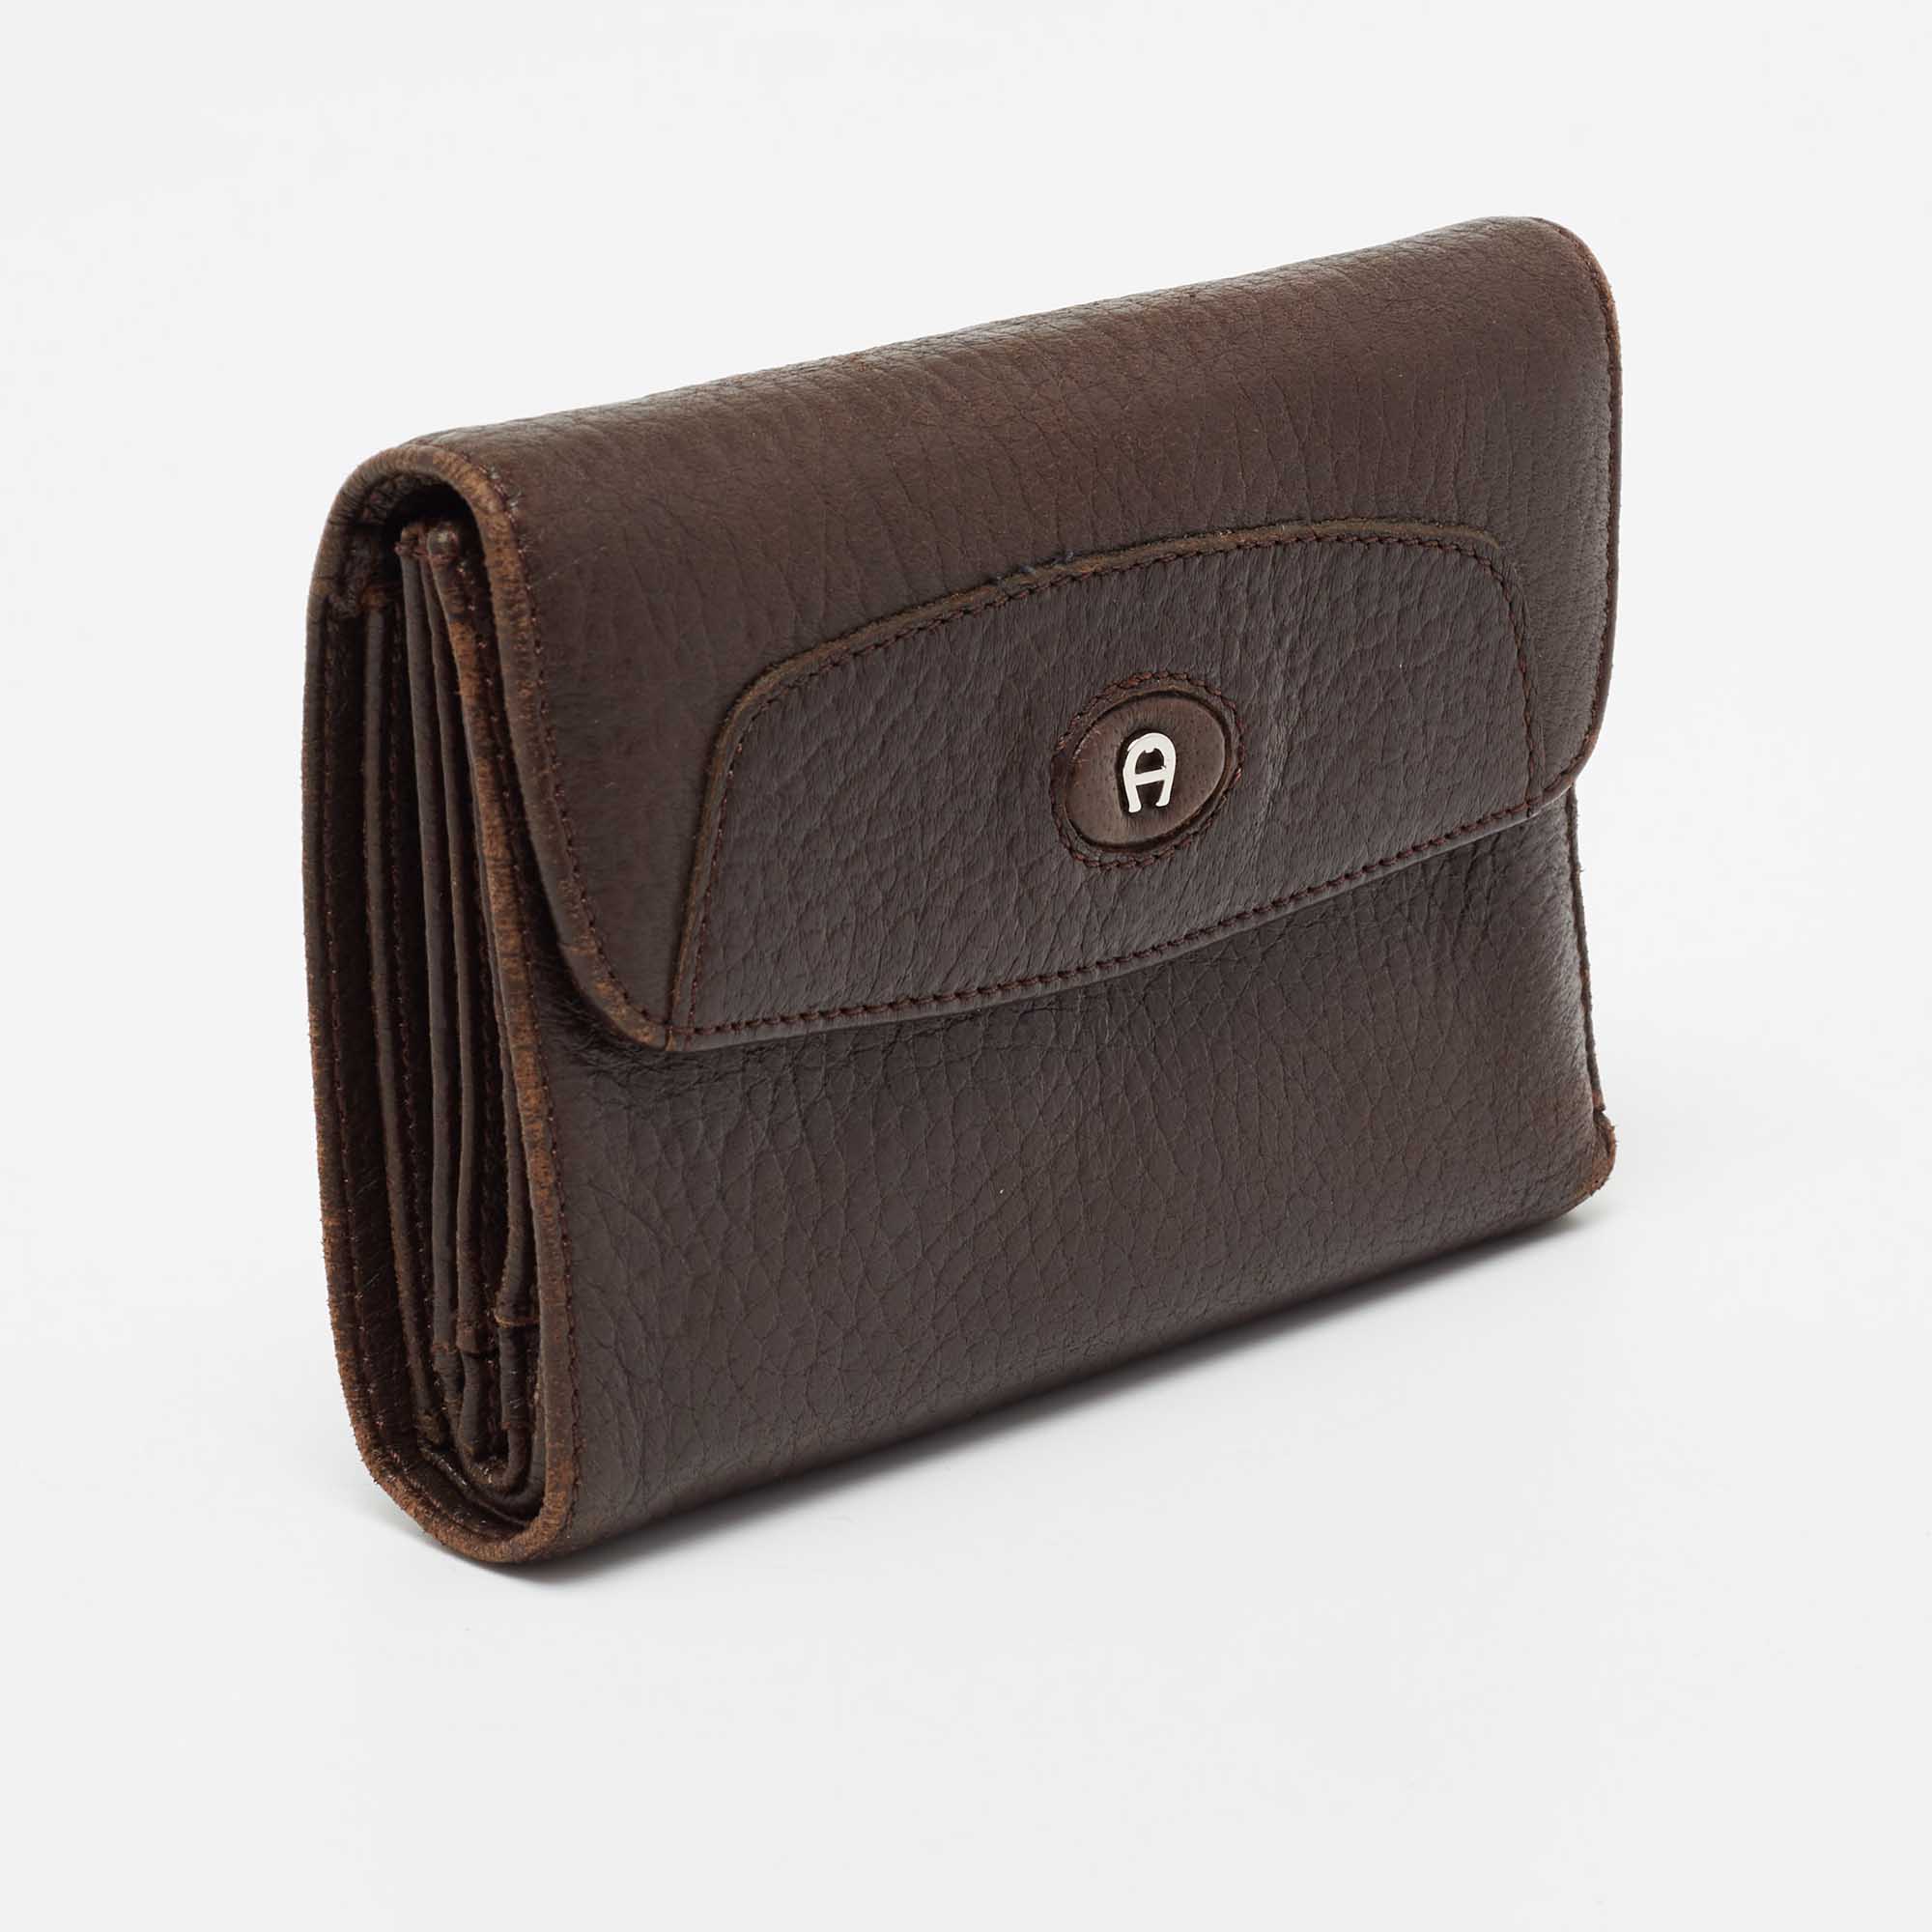 Aigner Brown Leather Logo Flap Trifold Wallet